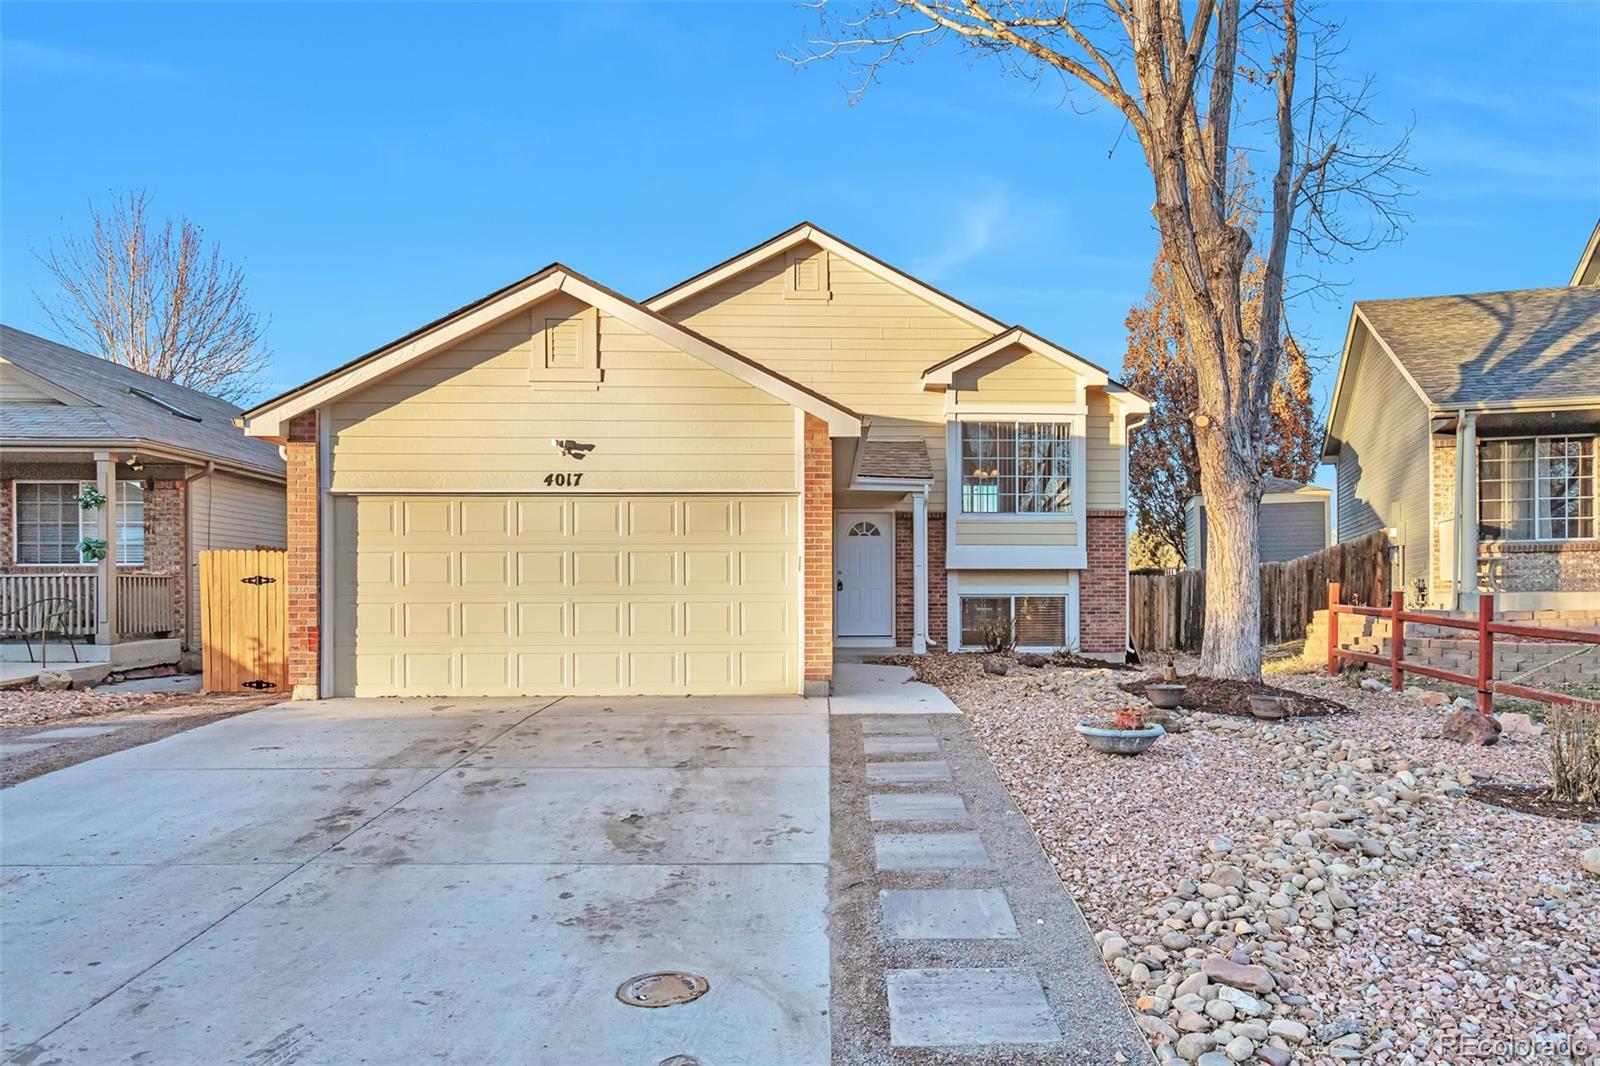 4017 W 62nd. Place, arvada MLS: 2633499 Beds: 4 Baths: 3 Price: $575,000